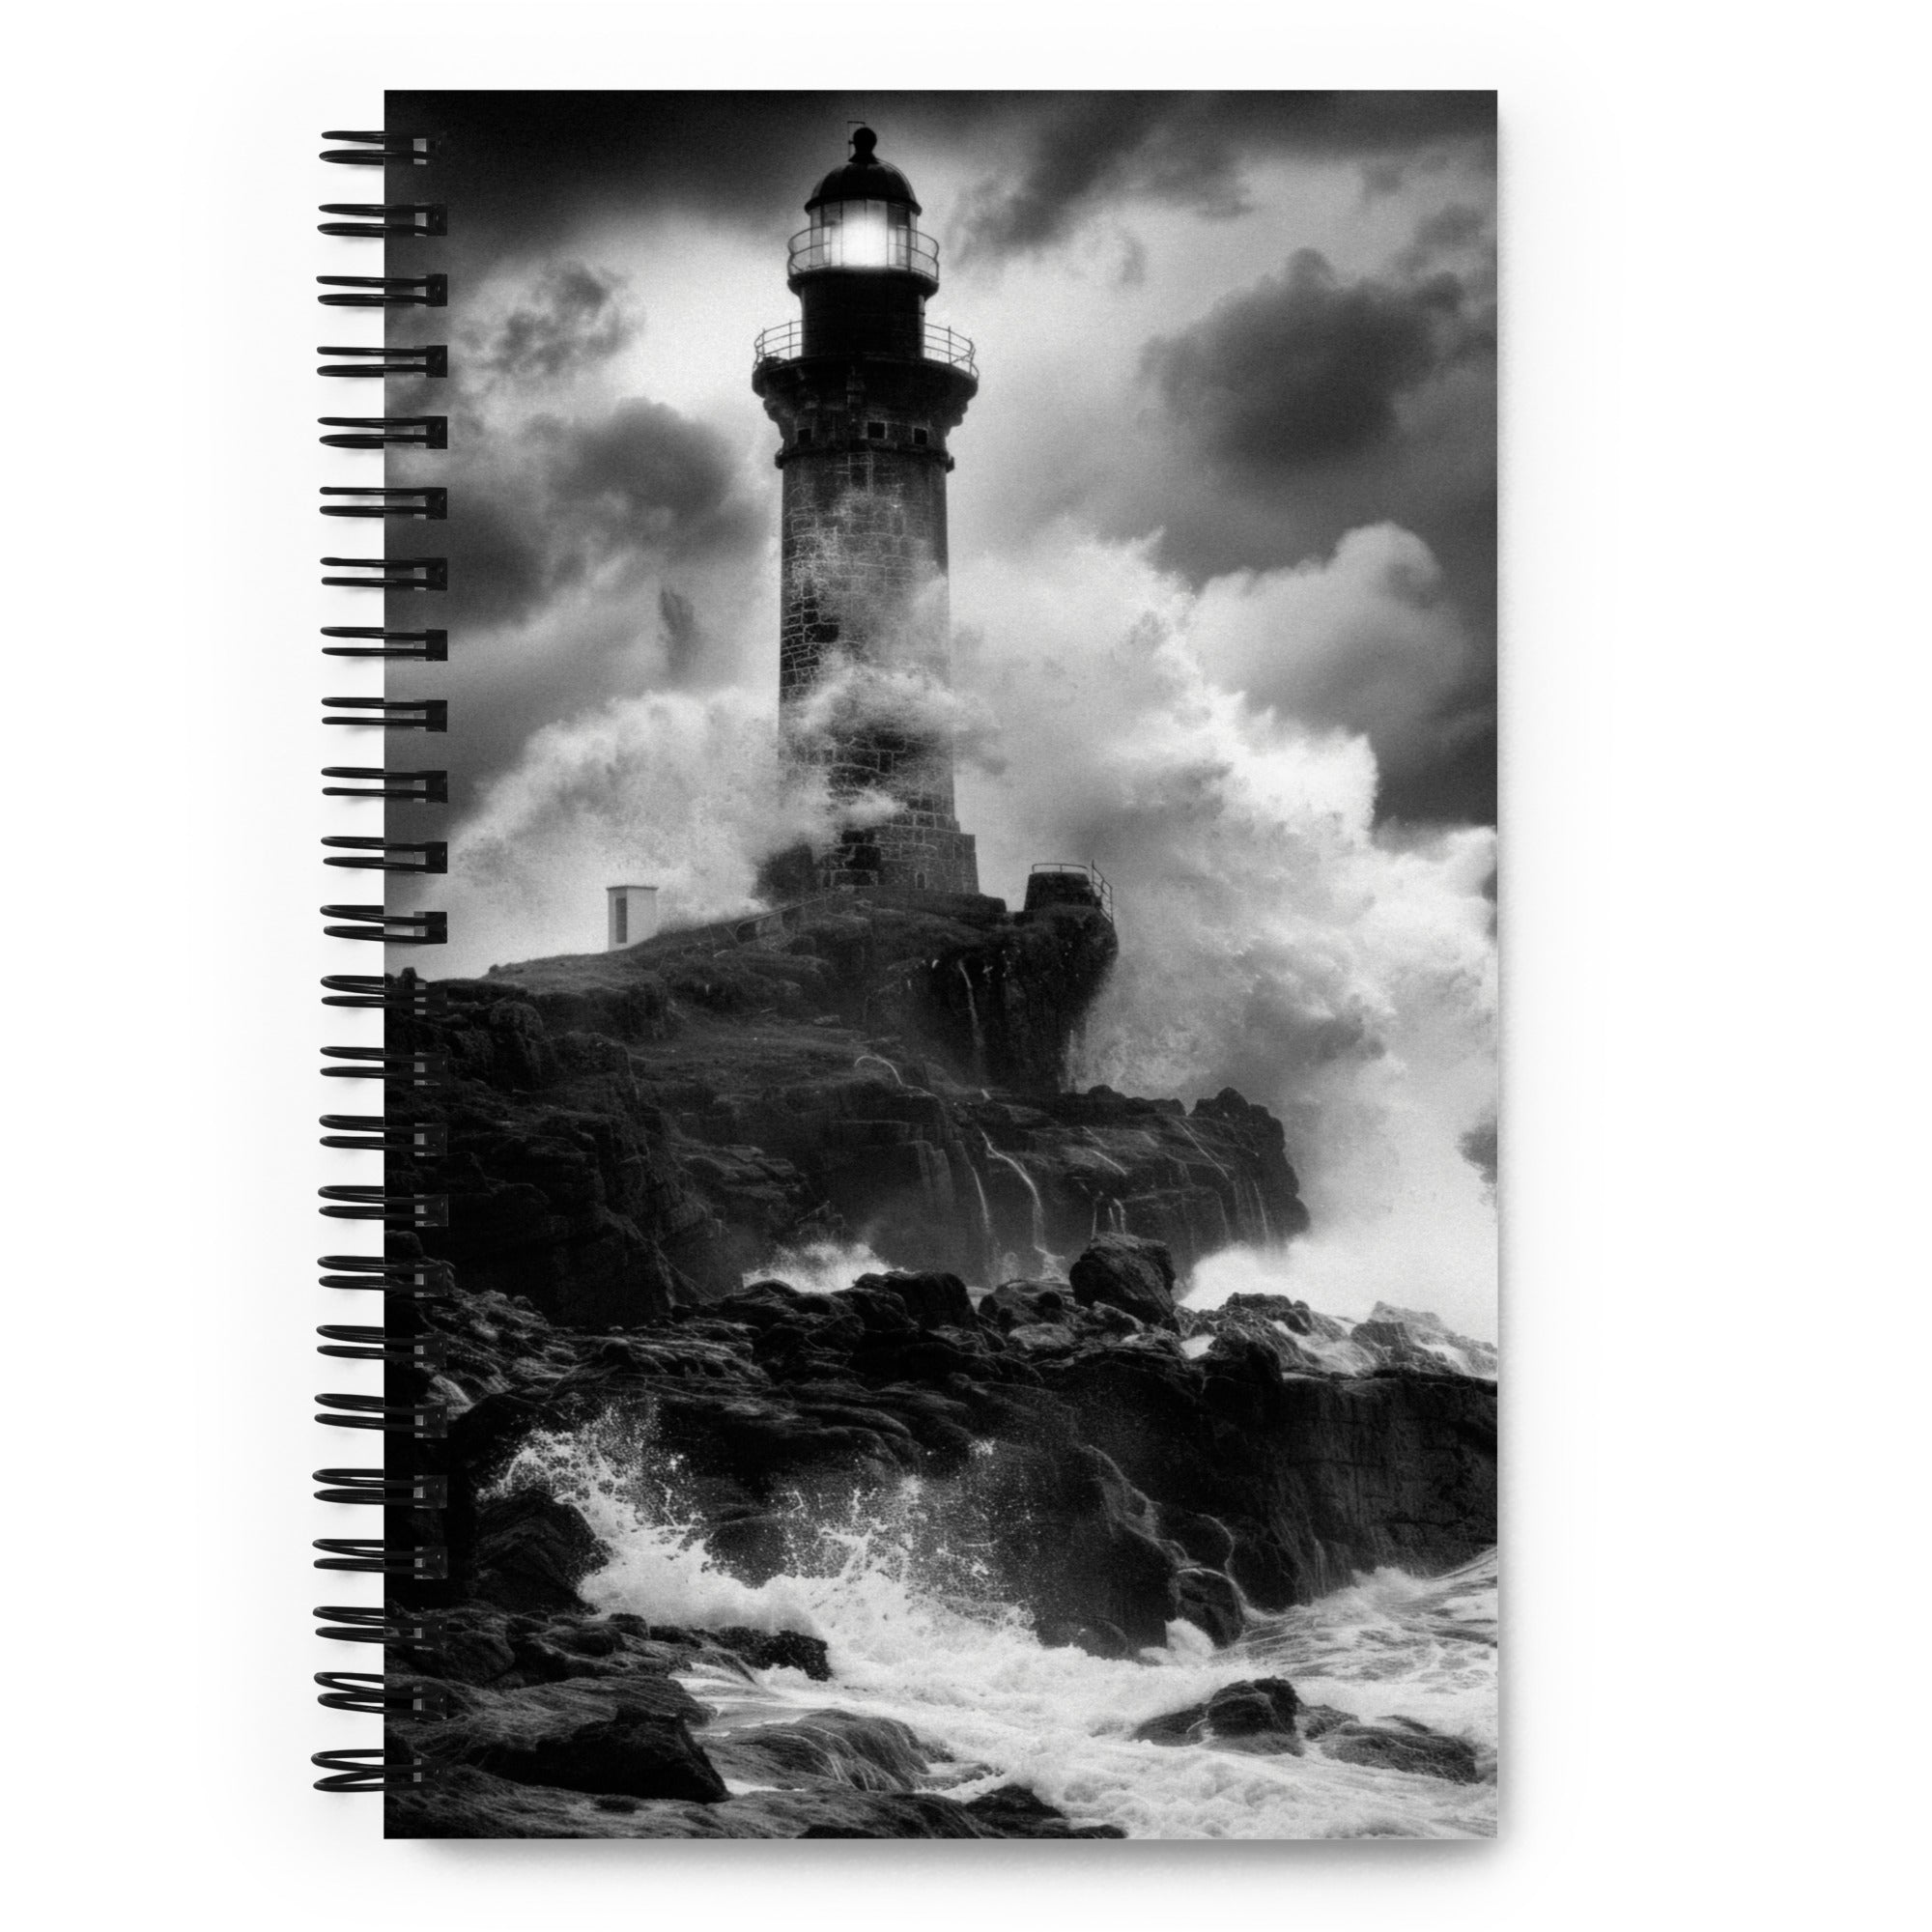 A solitary lighthouse stands resolute against the onslaught of a massive, crashing wave in this breathtaking black and white art print, 